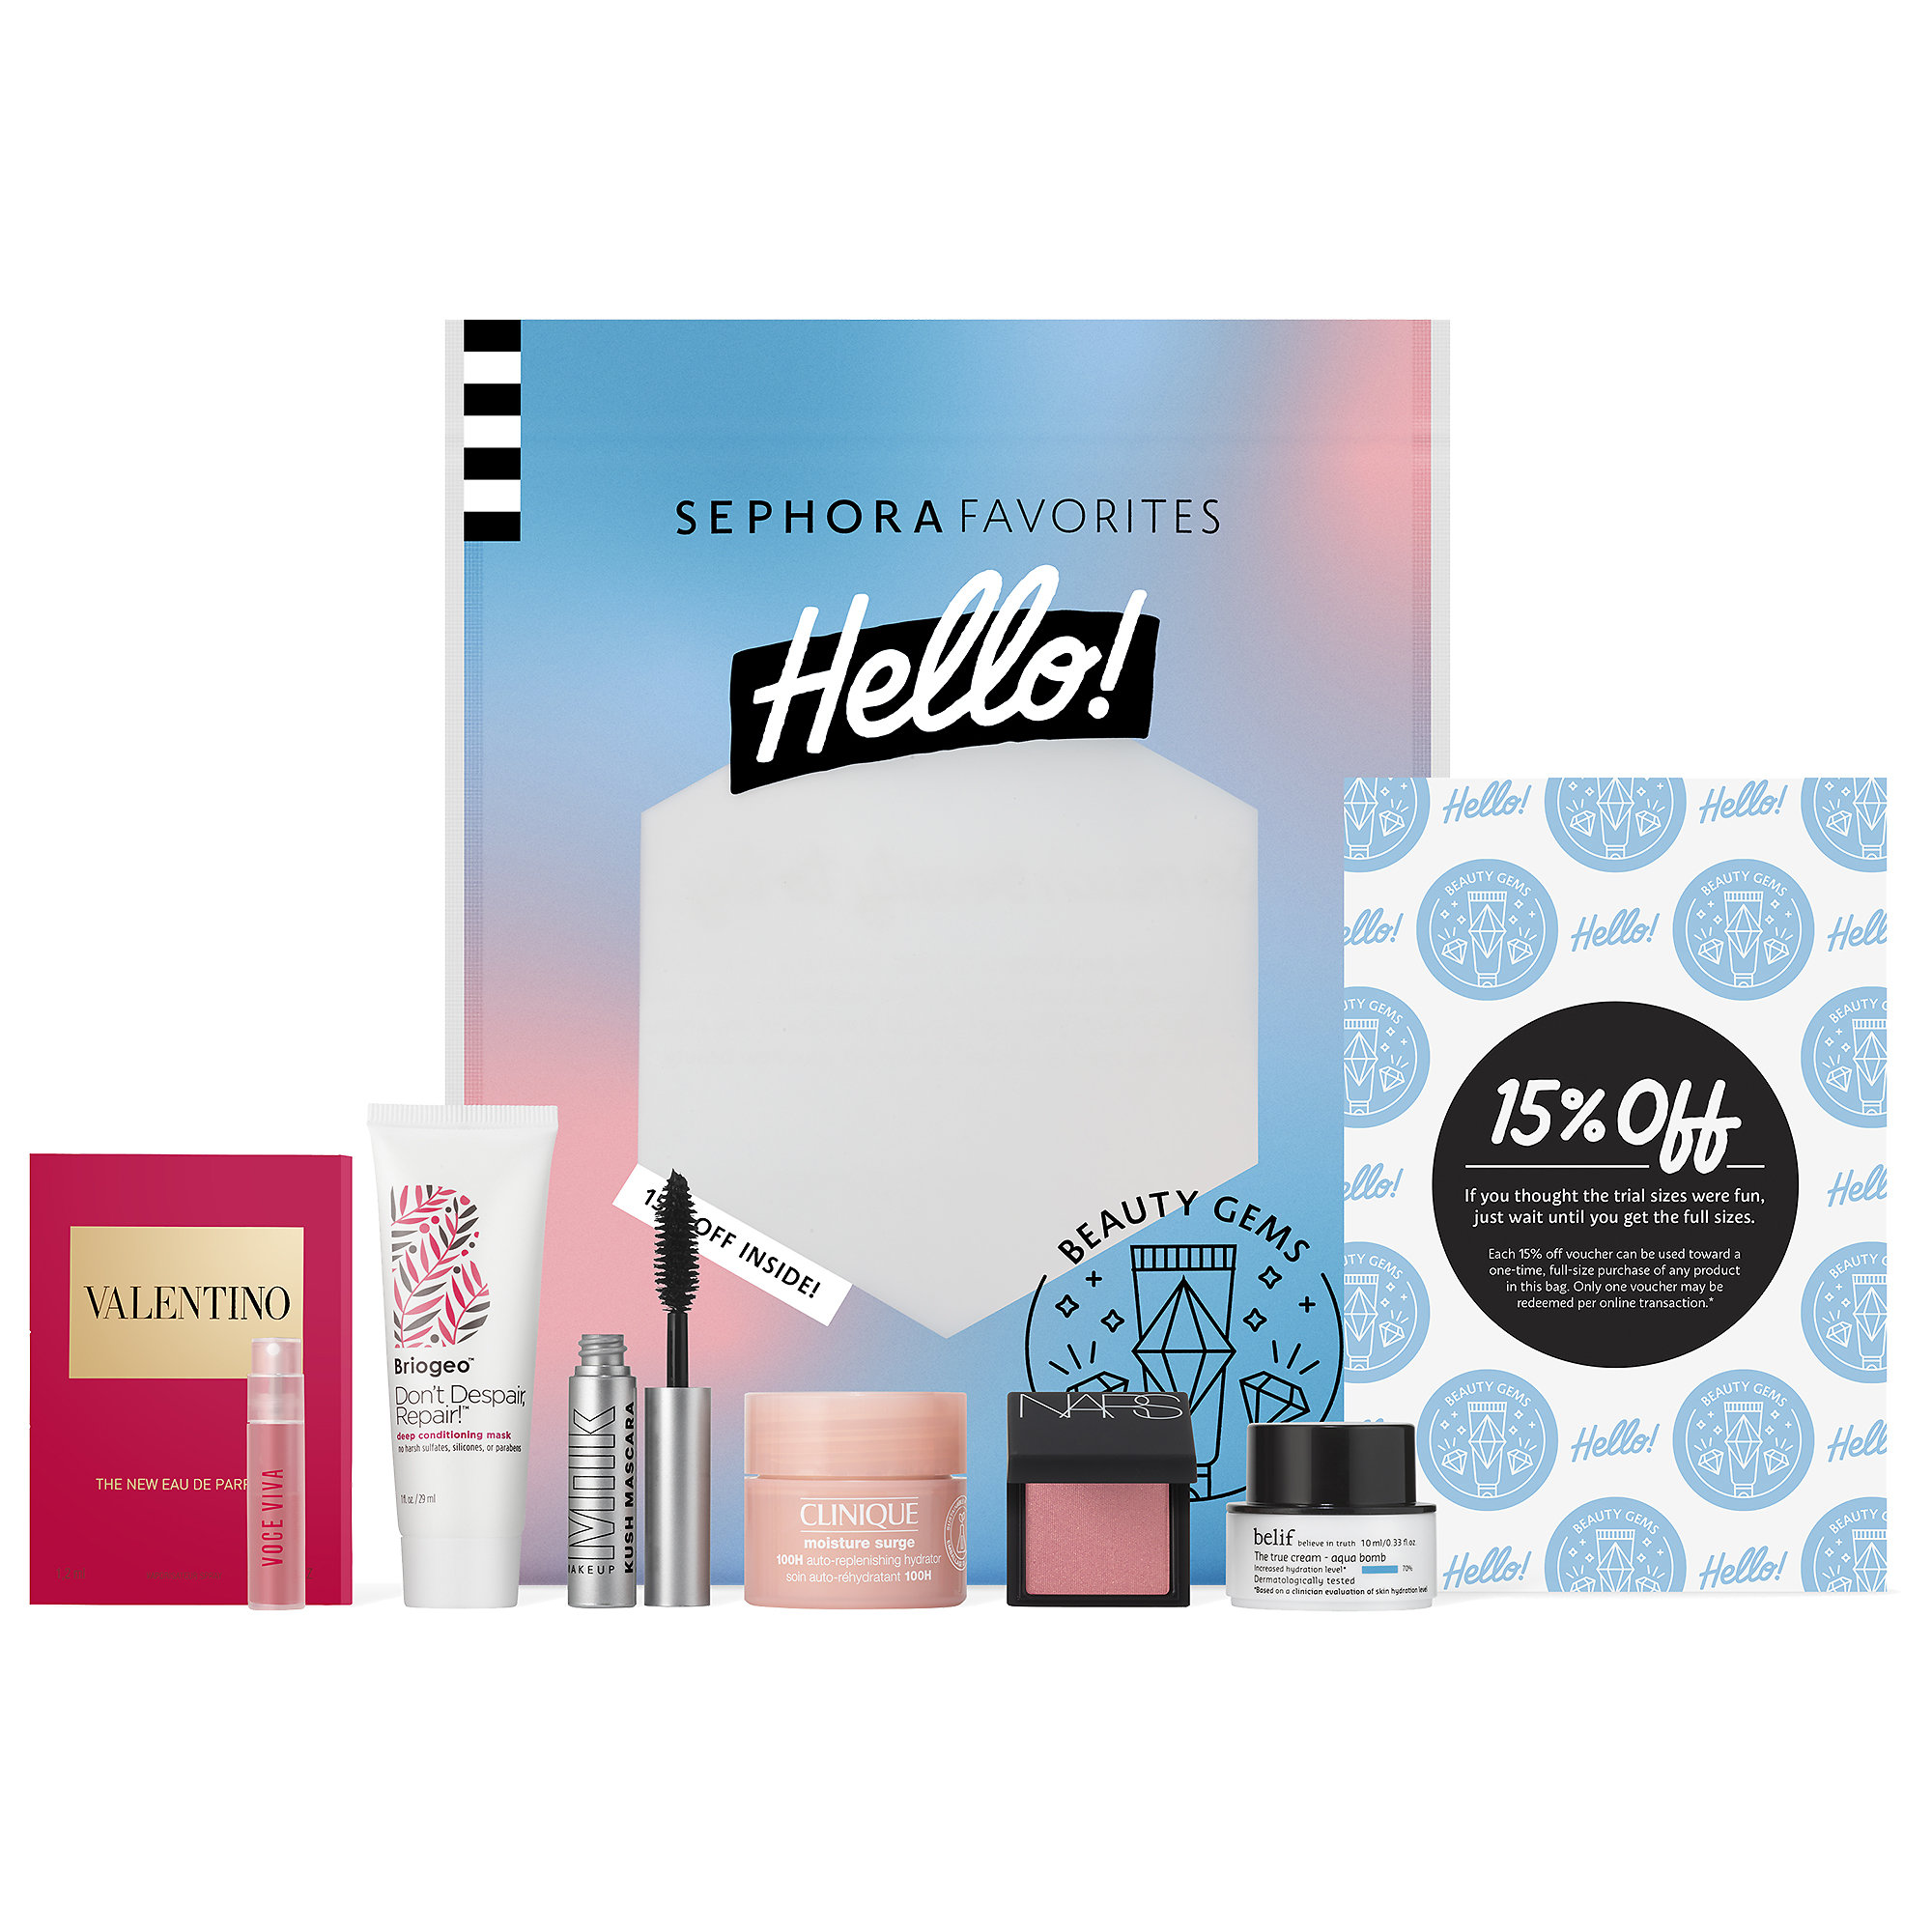 Sephora Favorites Hello! Beauty Gems Set Full Spoilers Available Now